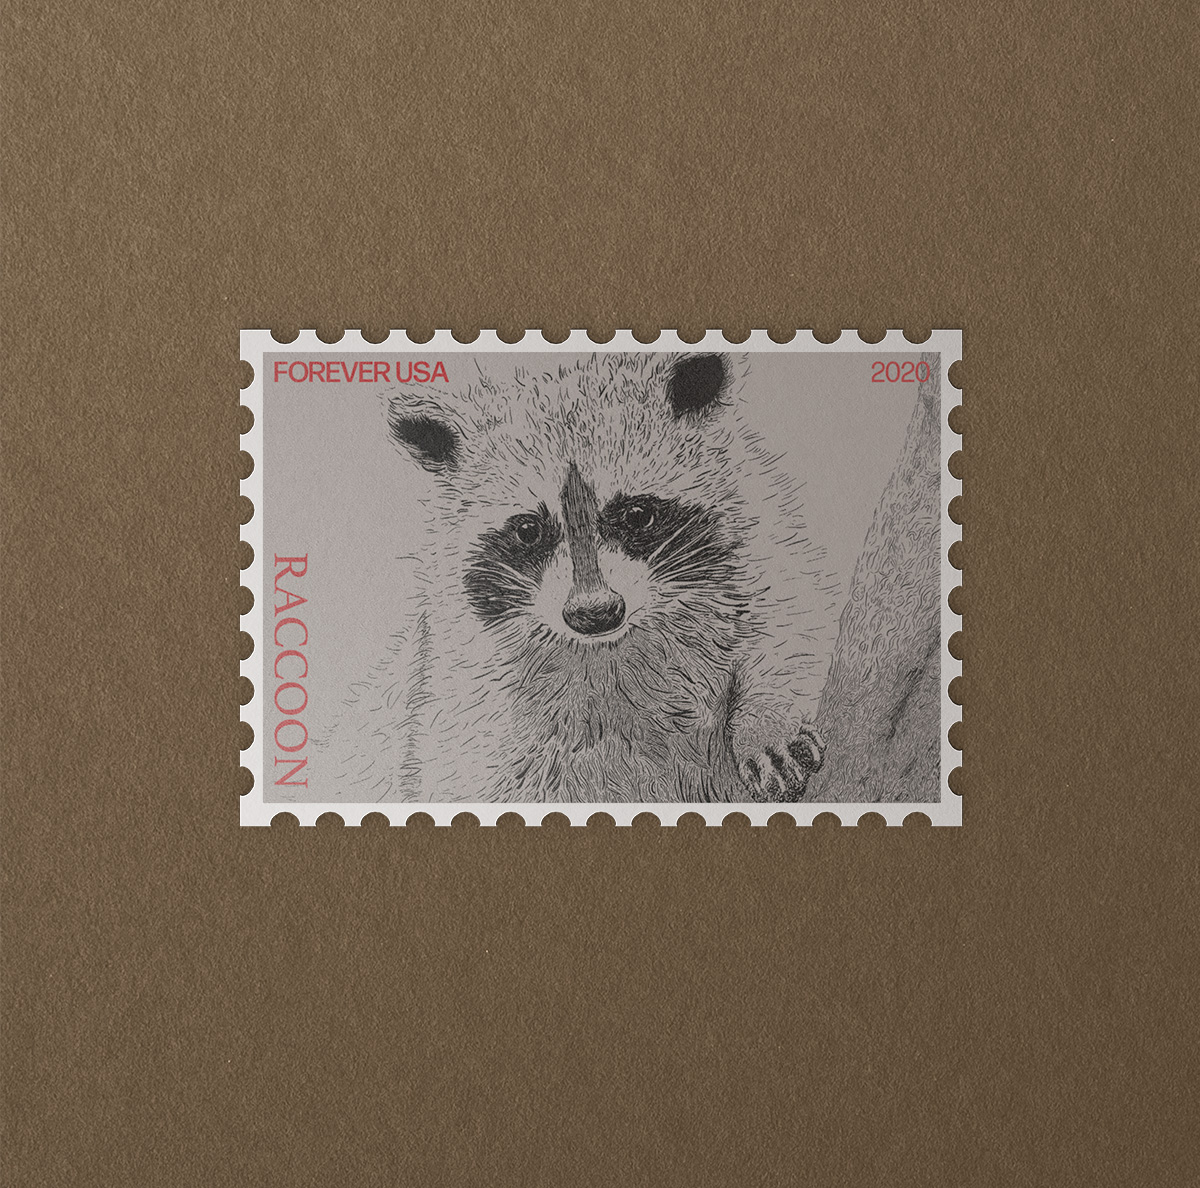 This is an engraving illustration of a raccoon thats finished in black and white. On top of the illustration is red typography that indicates it's a stamp.